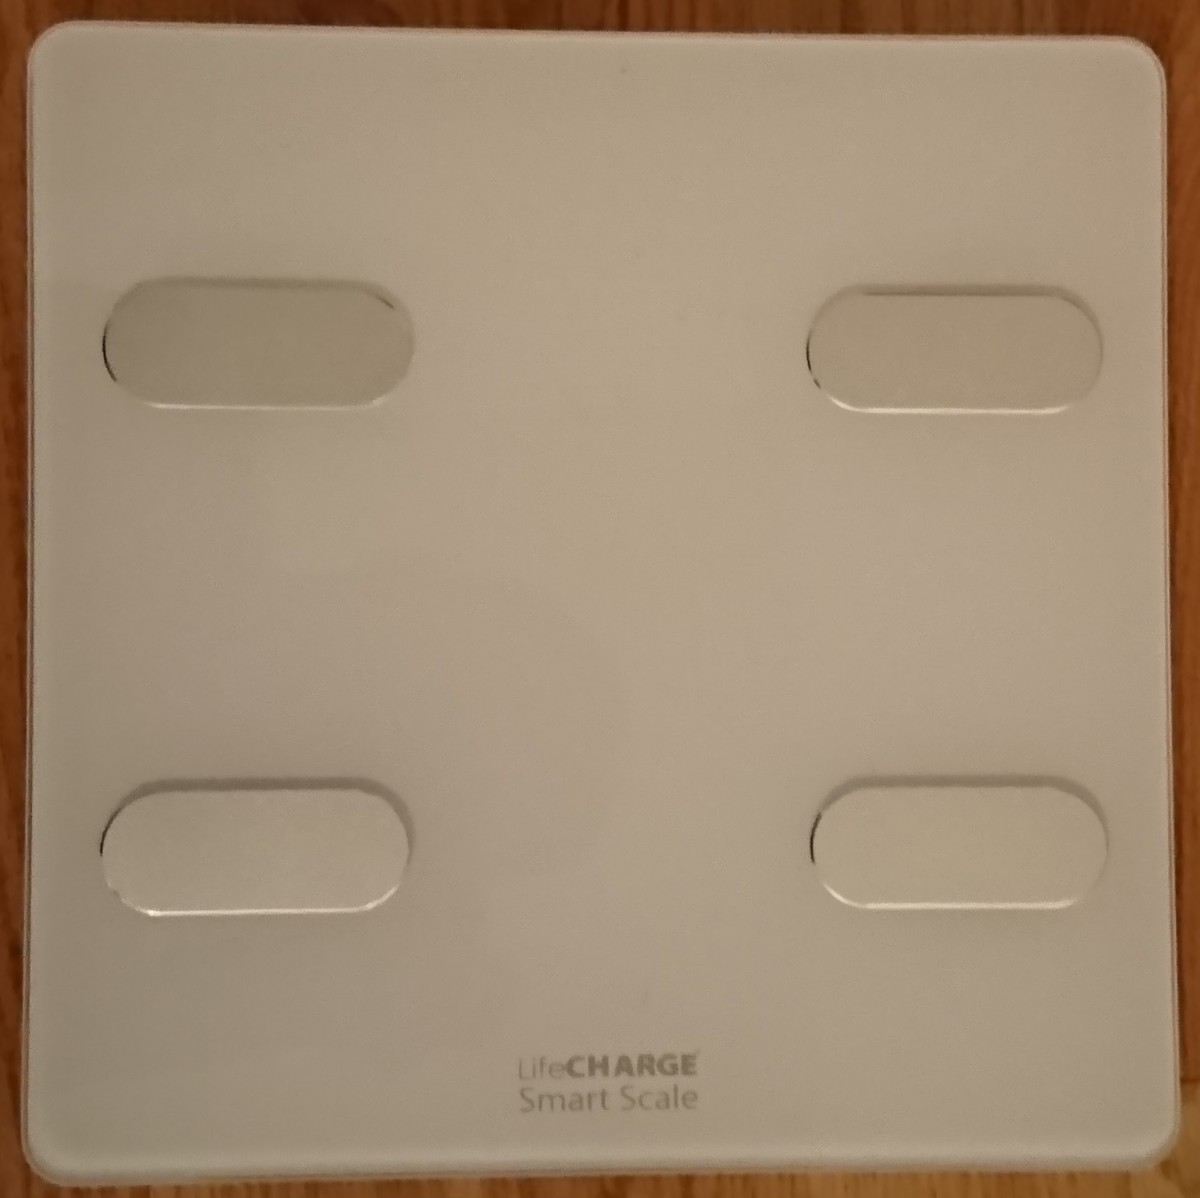 lifecharge-smart-scale-and-body-composition-analyzer-review